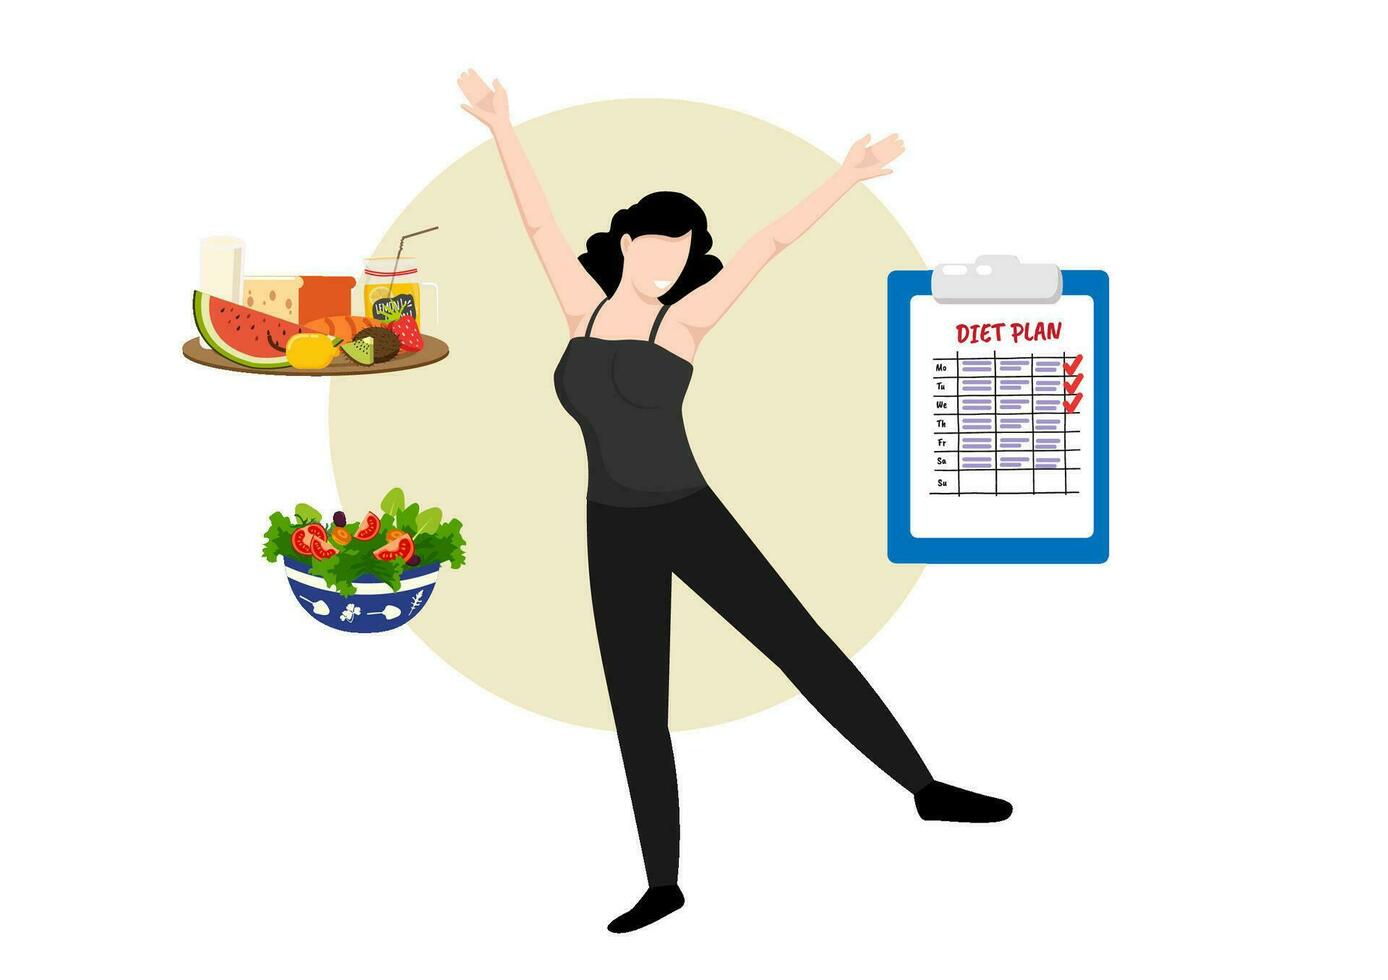 The girl's healthy lifestyle is glad that she can control her diet. Ready to check the daily meal plan Vector illustration